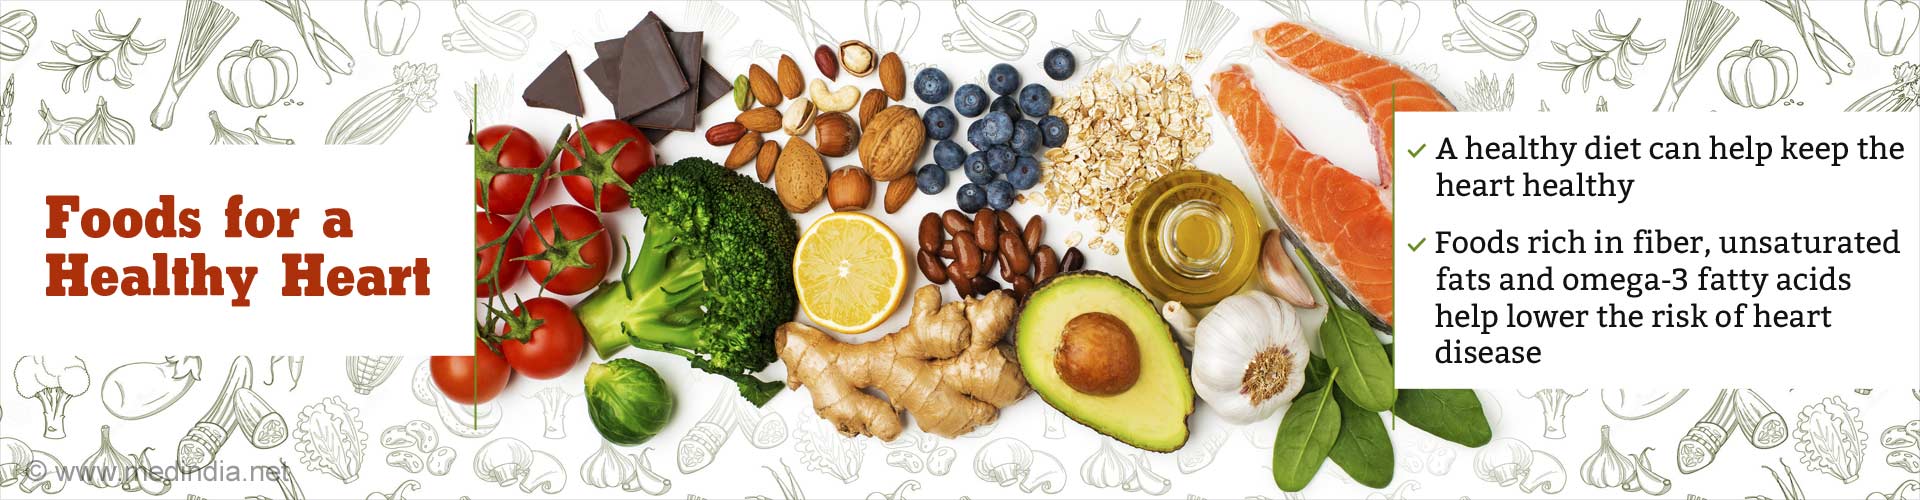 Foods for a Healthy Heart 
- A healthy diet can help keep the heart healthy
- Foods rich in fiber, unsaturated fats and omega-3 fatty acids help lower the risk of heart disease